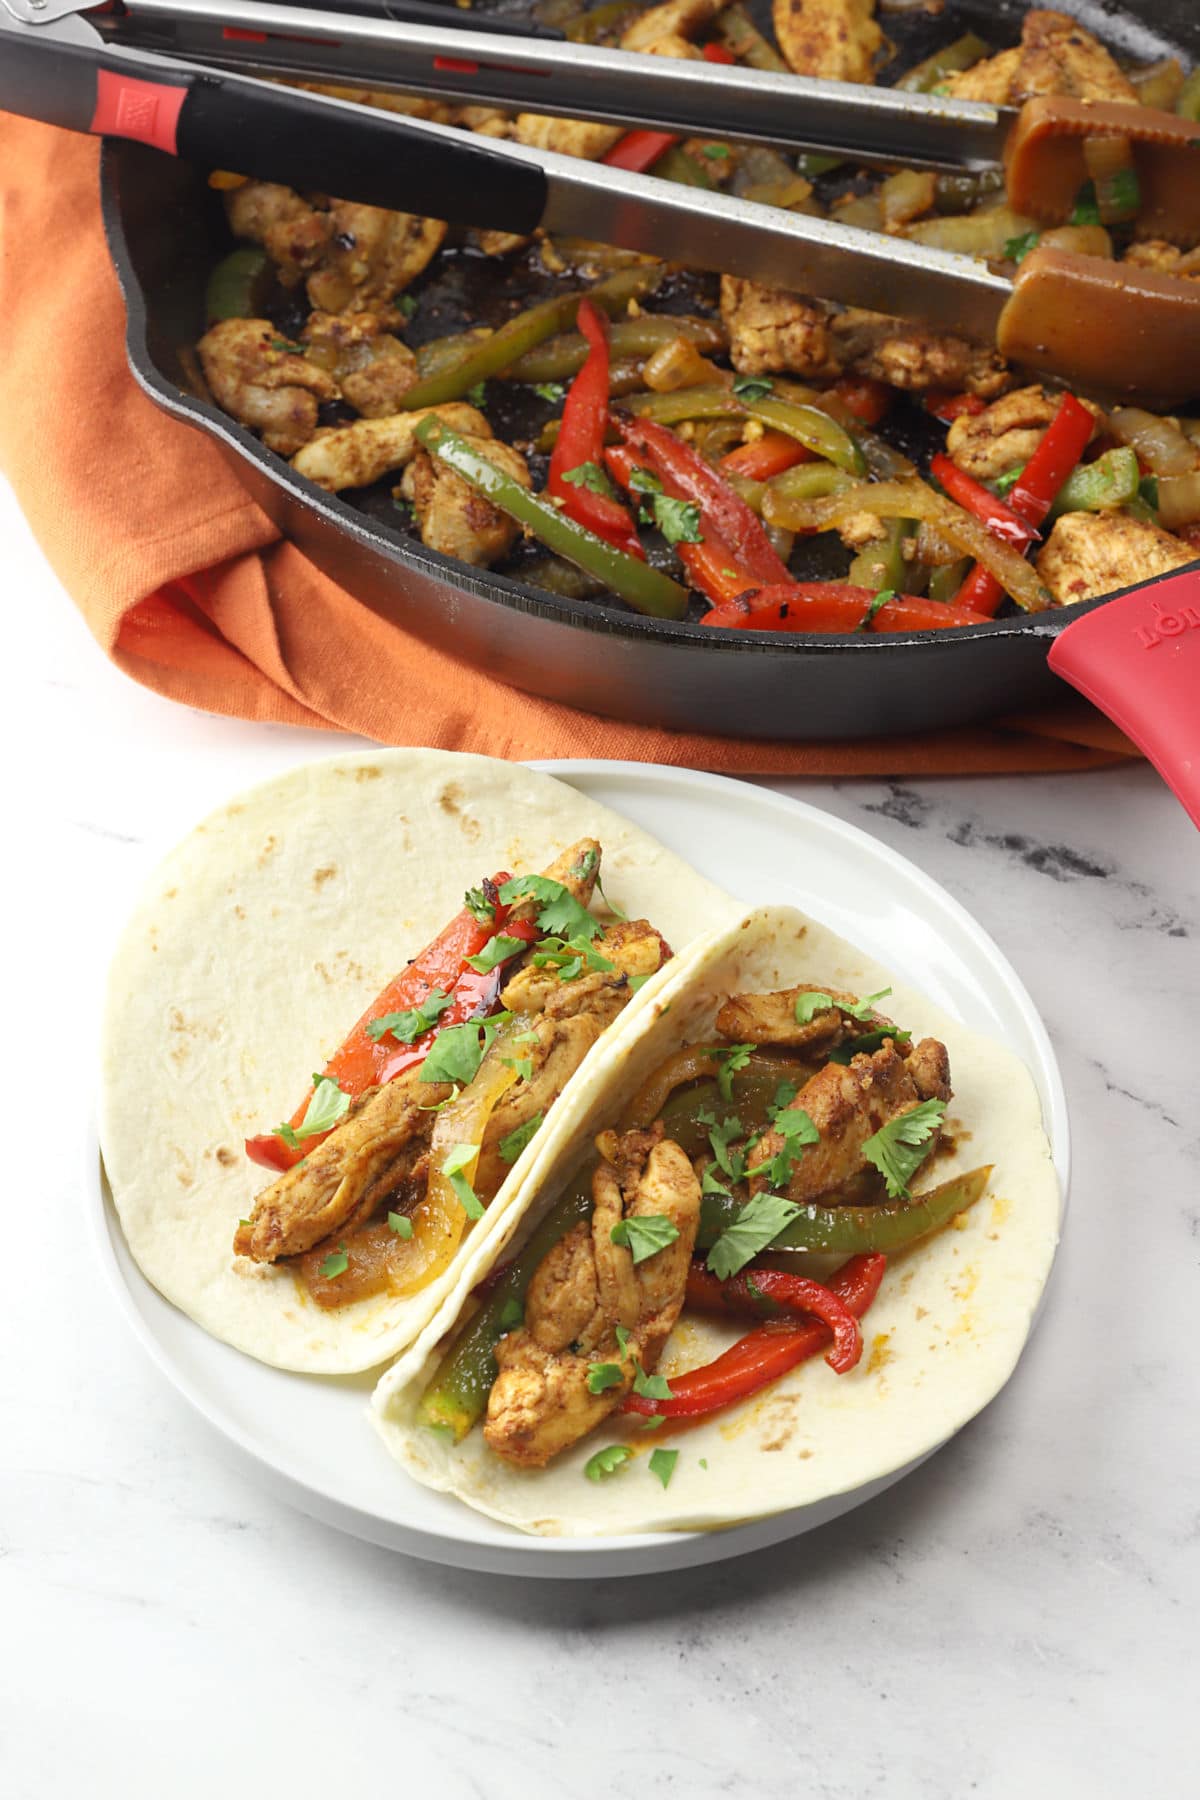 Two flour tortillas filled with cooked chicken thighs, onions, and peppers, with a cast iron skillet of fajita filling in the background.